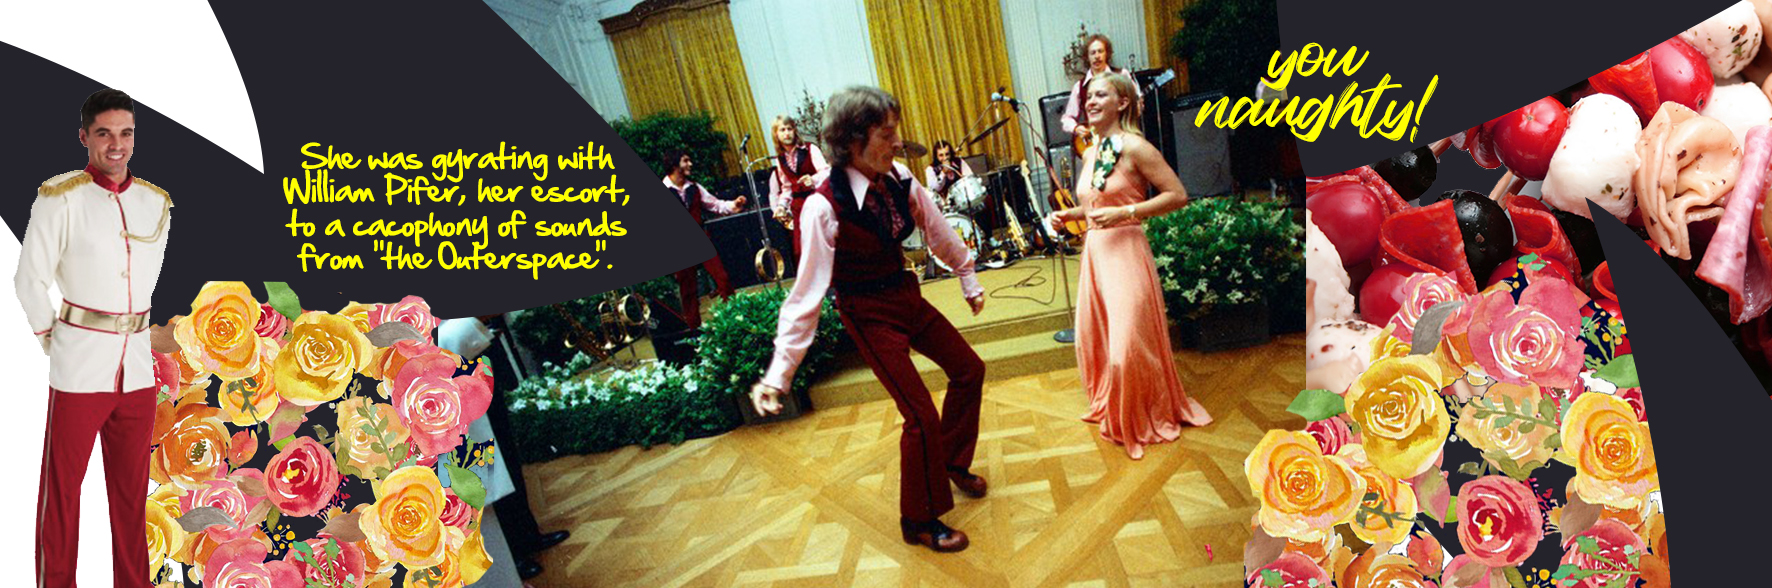 prom history facts - prom night was once held at the White House